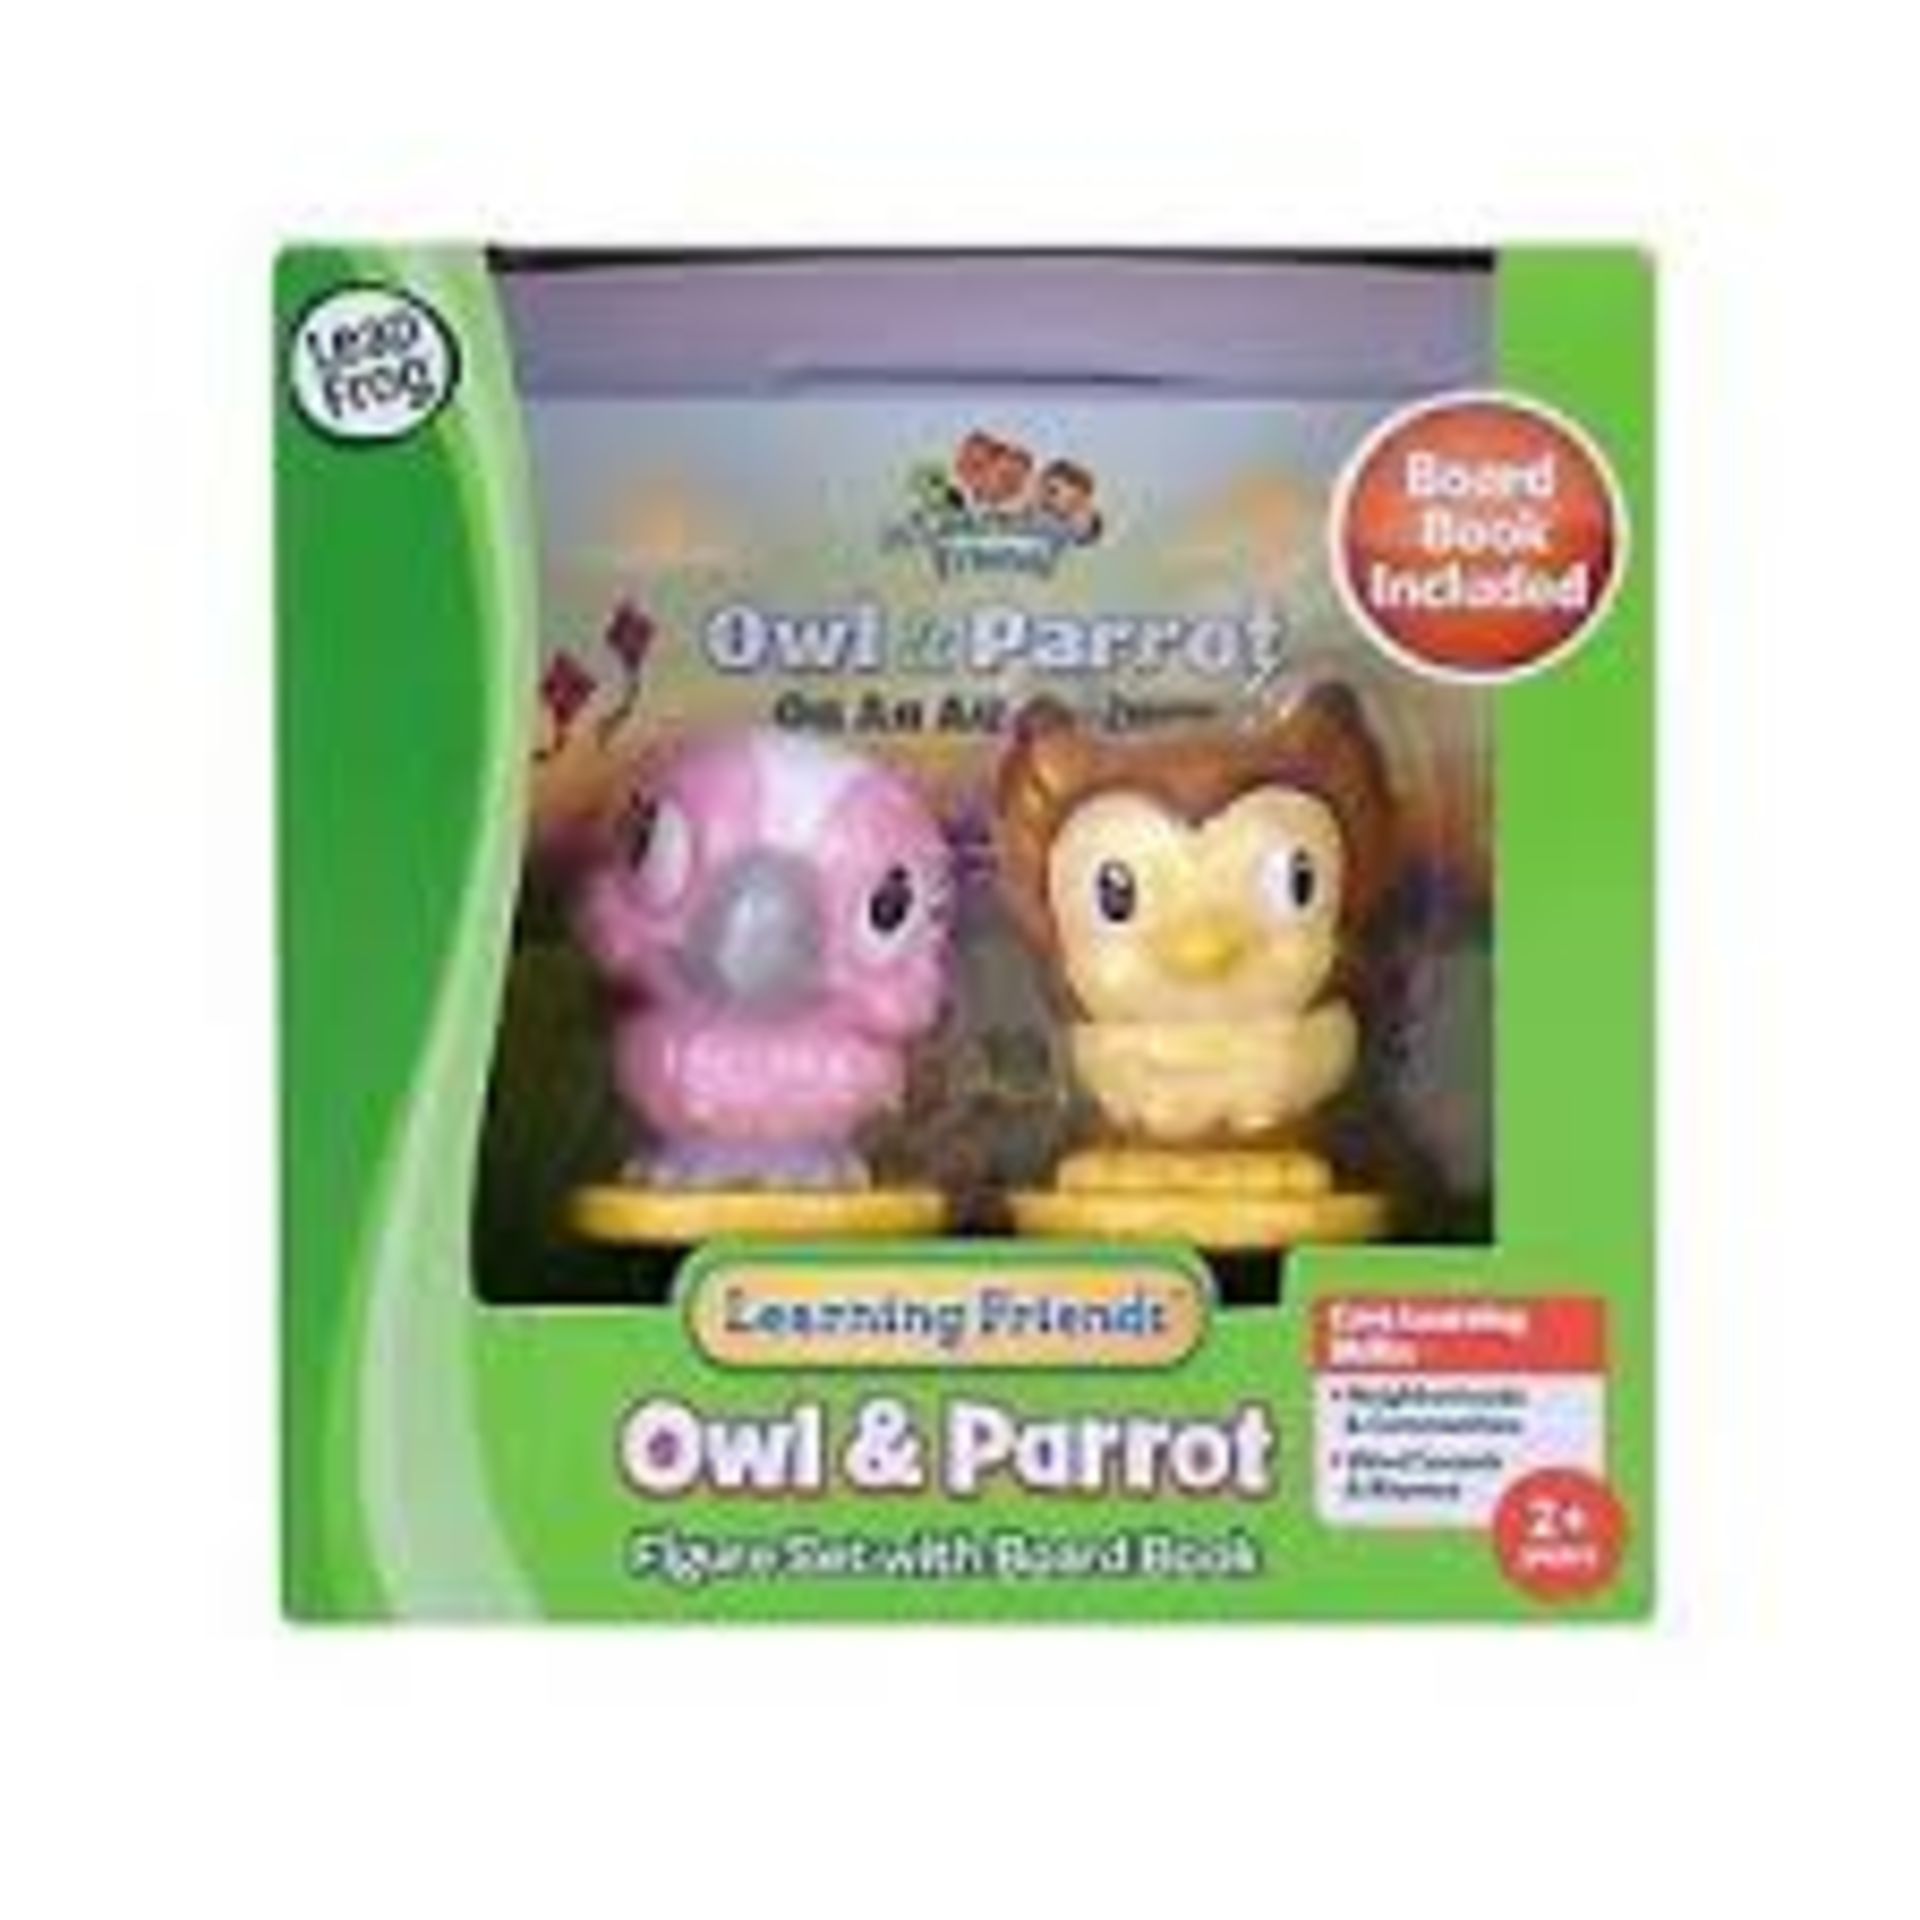 168 x LeapFrog Learning Friends Owl and Parrot Figures with Board Book | 708431192669 | RRP £ 1006.3